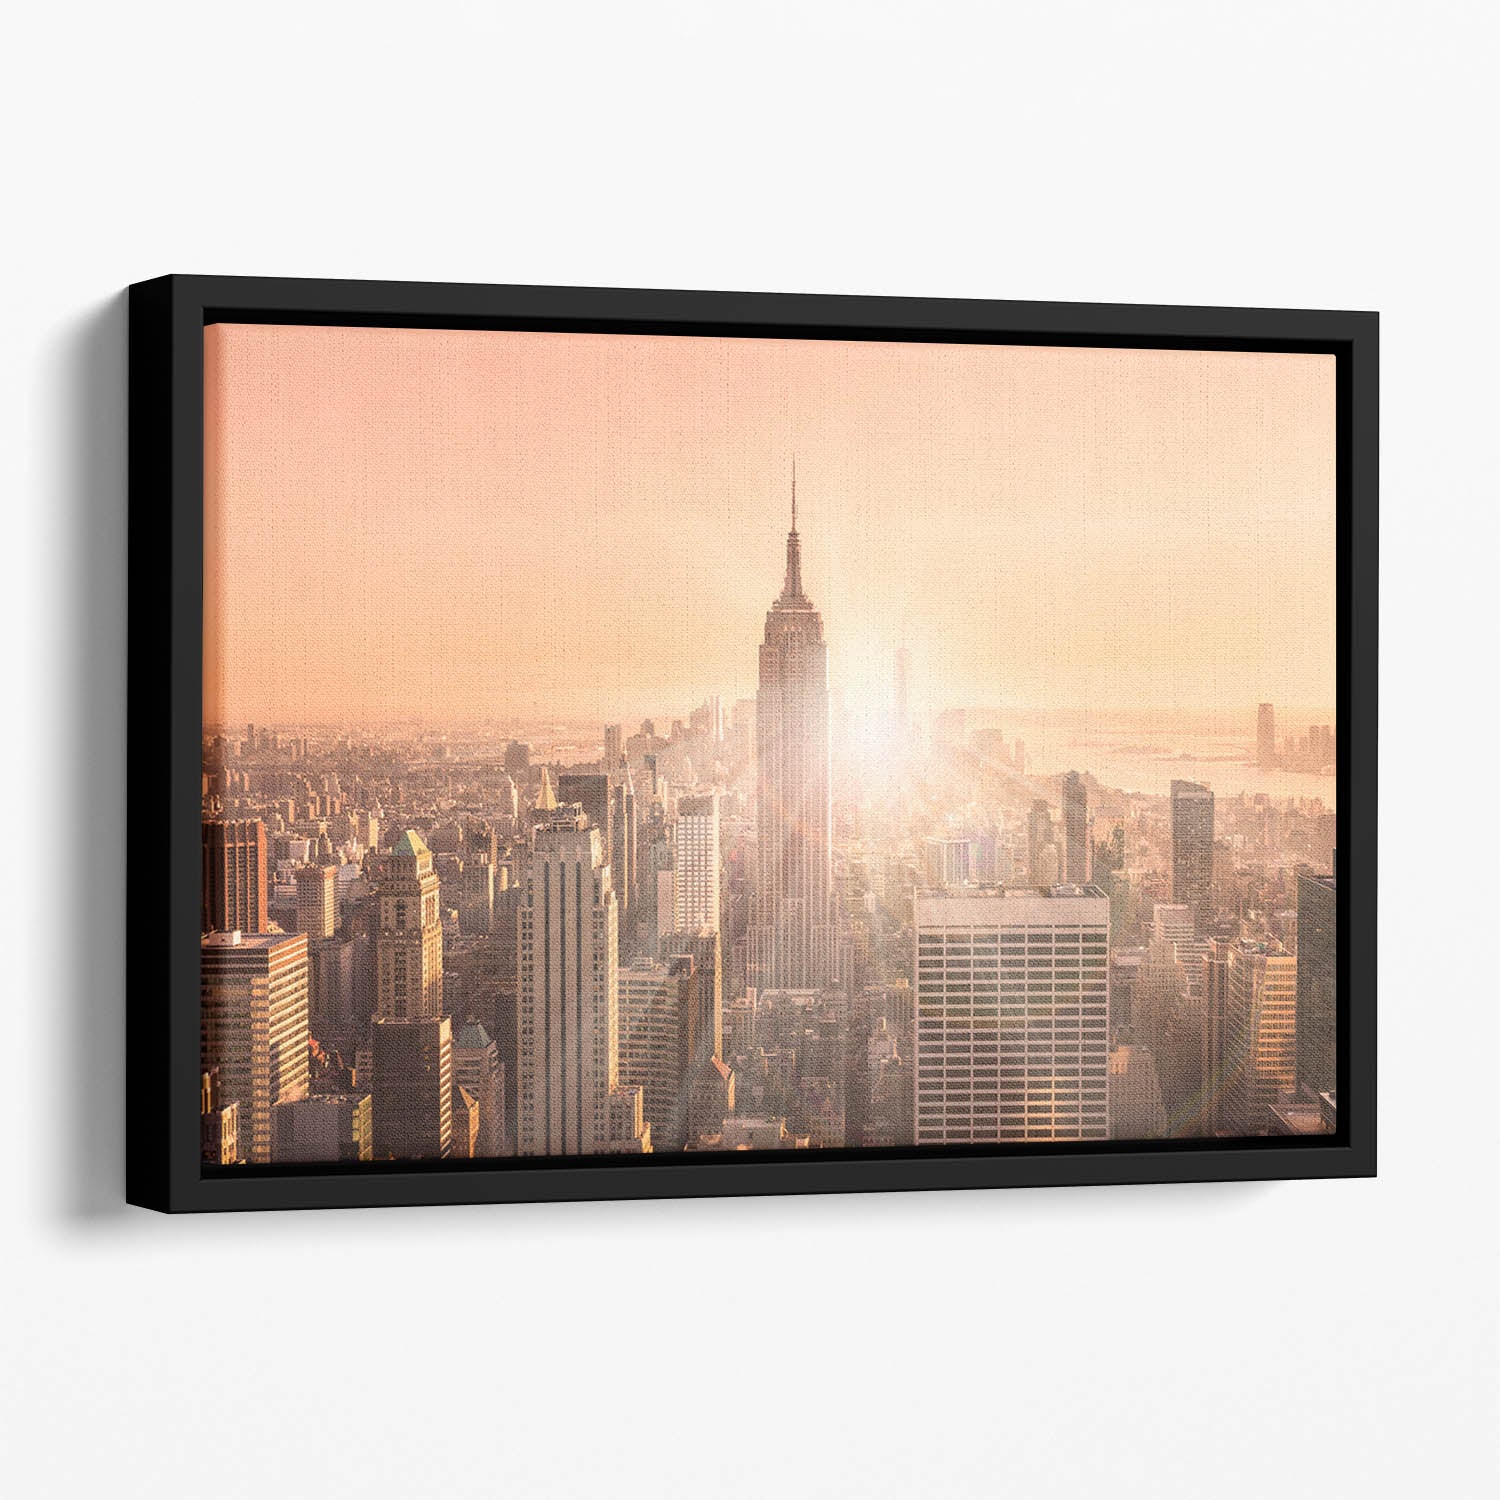 Manhattan downtown skyline with illuminated Empire State Building Floating Framed Canvas